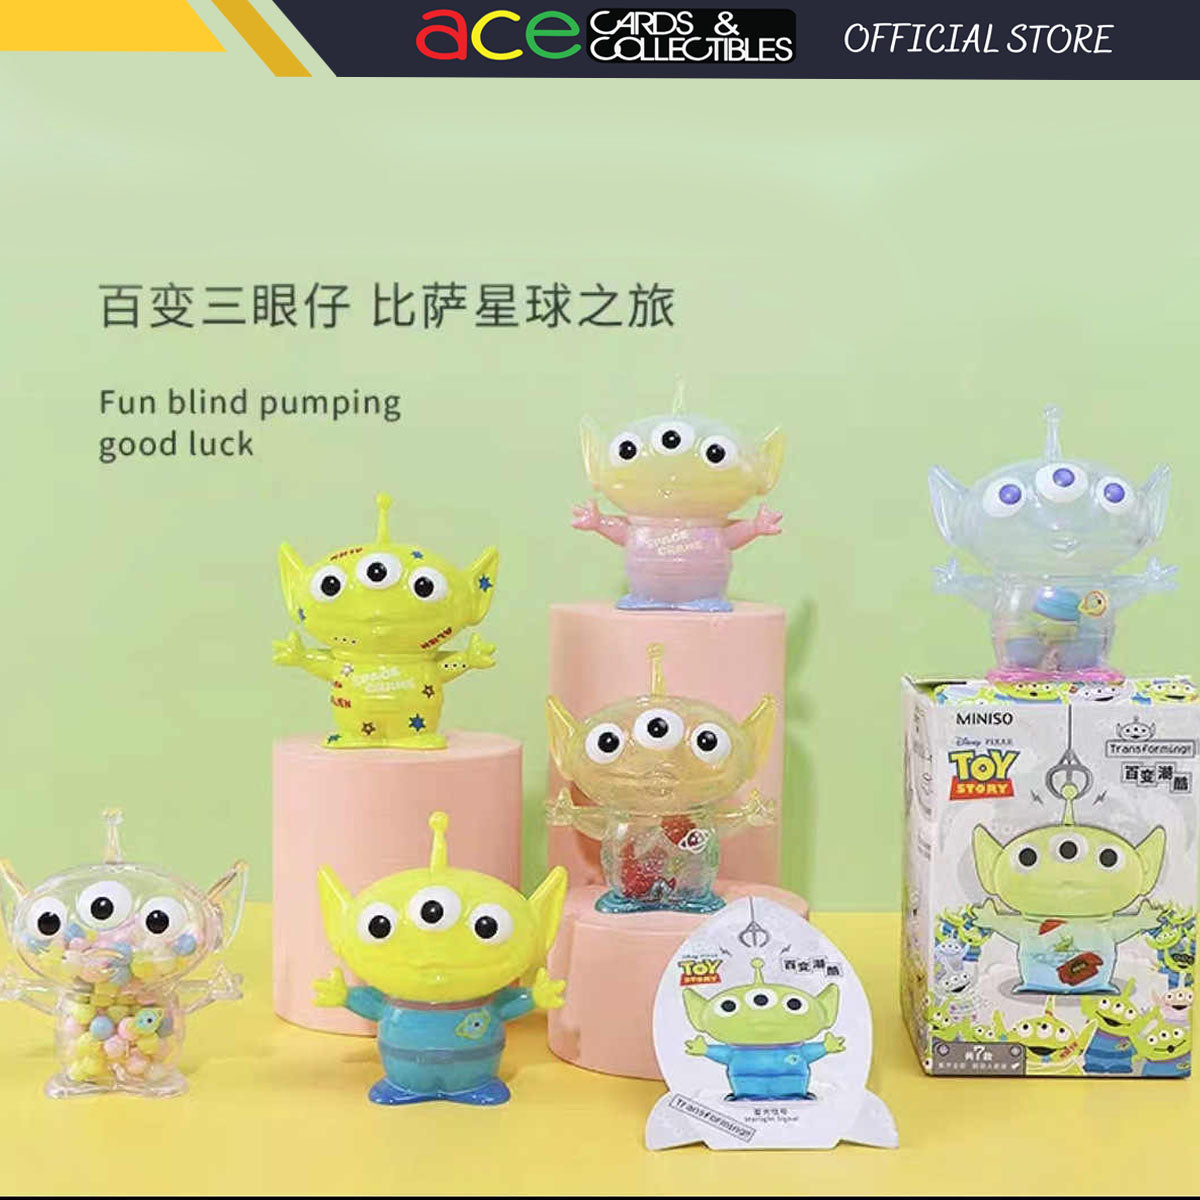 Miniso x Disney Pixar Toy Story Aliens Transforming Series-Whole Display Box (6pcs)-Miniso-Ace Cards & Collectibles